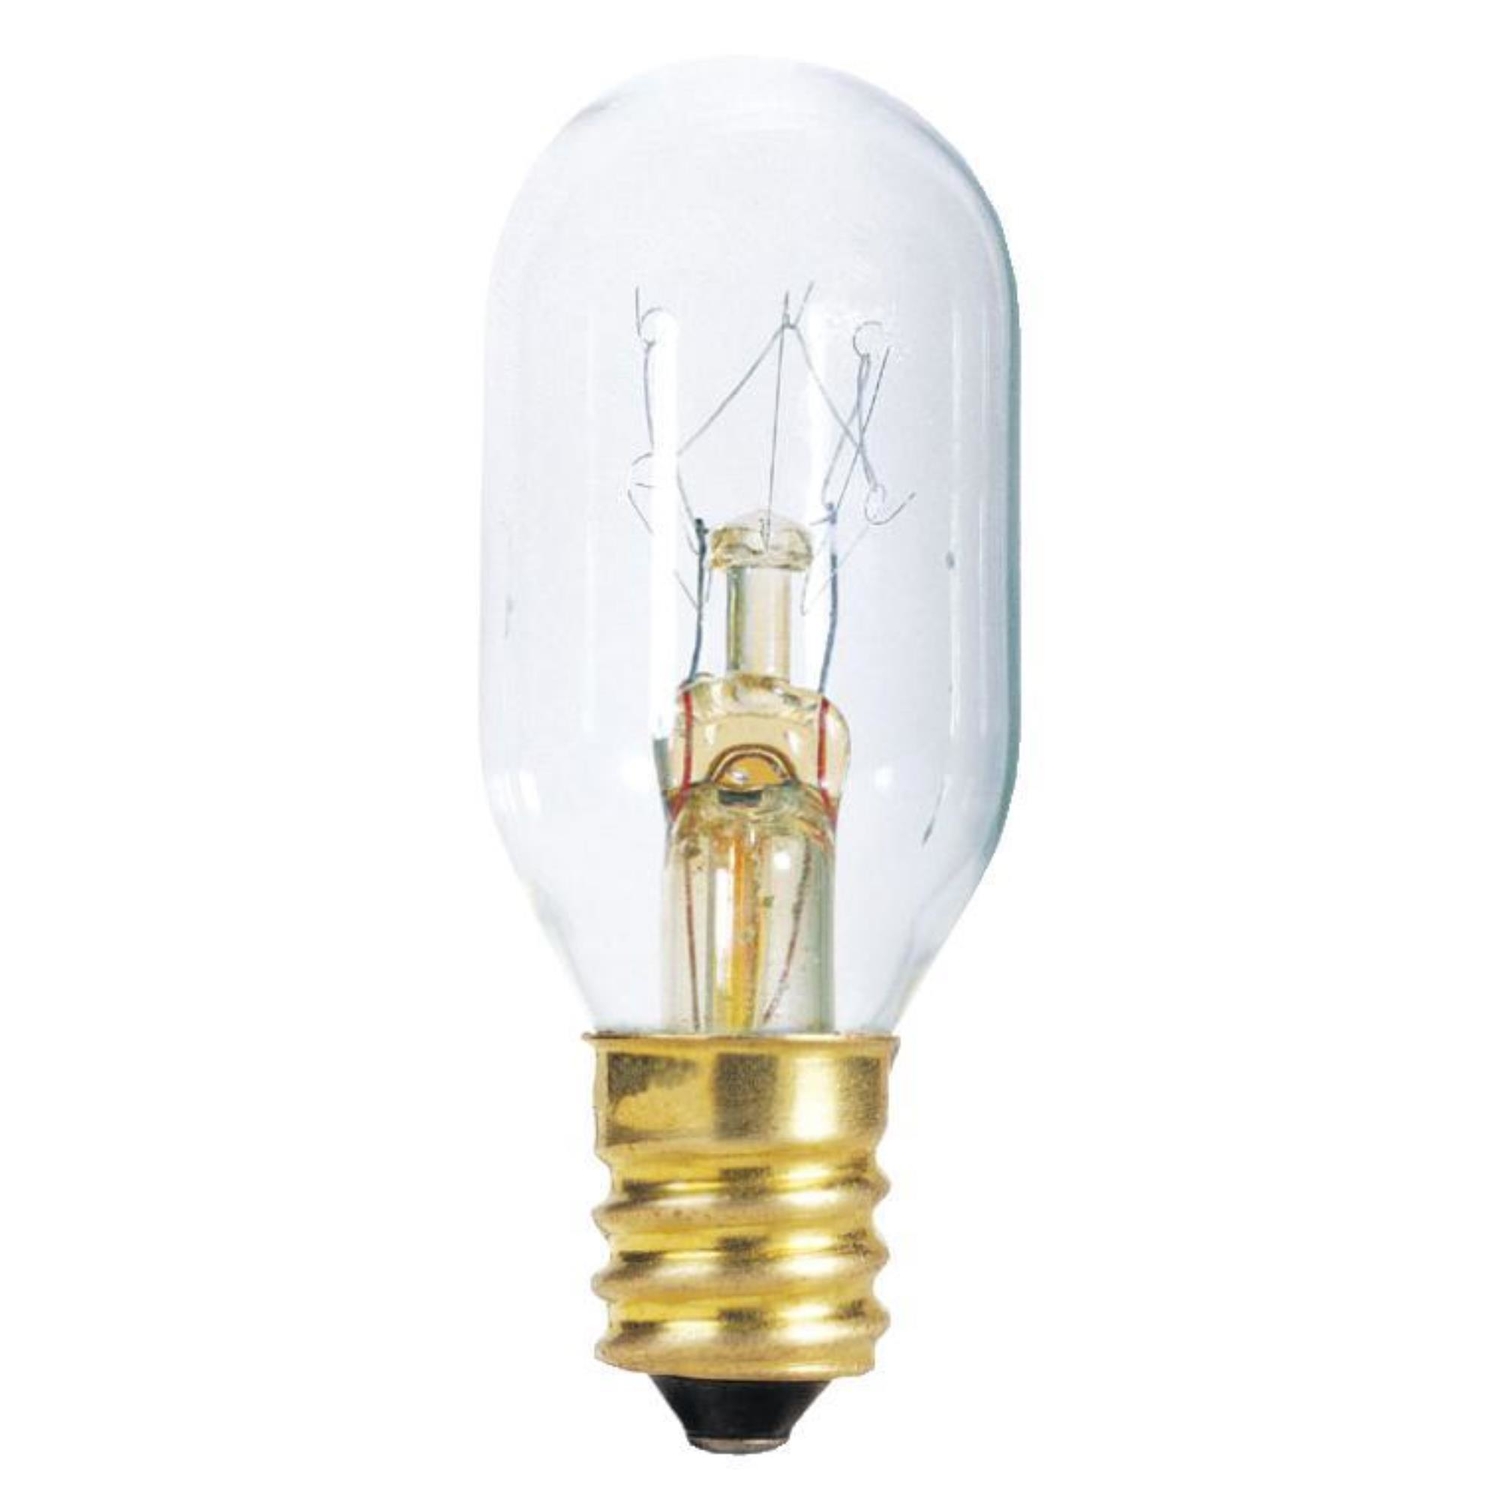 Westinghouse 15 W T7 Specialty Incandescent Bulb E12 (Candelabra) Warm White 1 pk